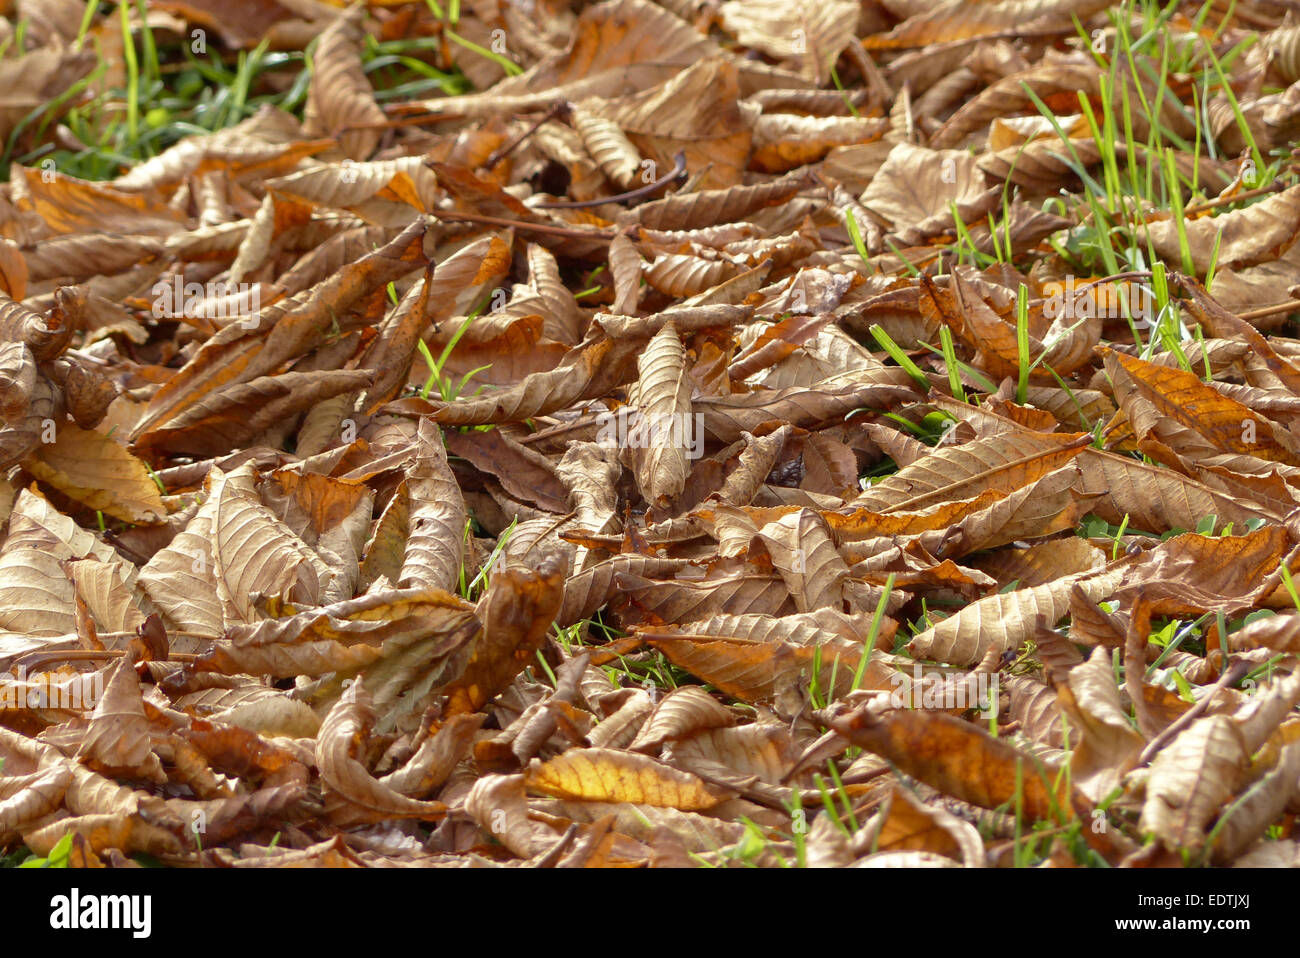 Herbstlaub am Boden,Autumn leaves on the ground,autumn, harvest, fall, leaves, foliage, beech leaves, season, colorful, detail, Stock Photo